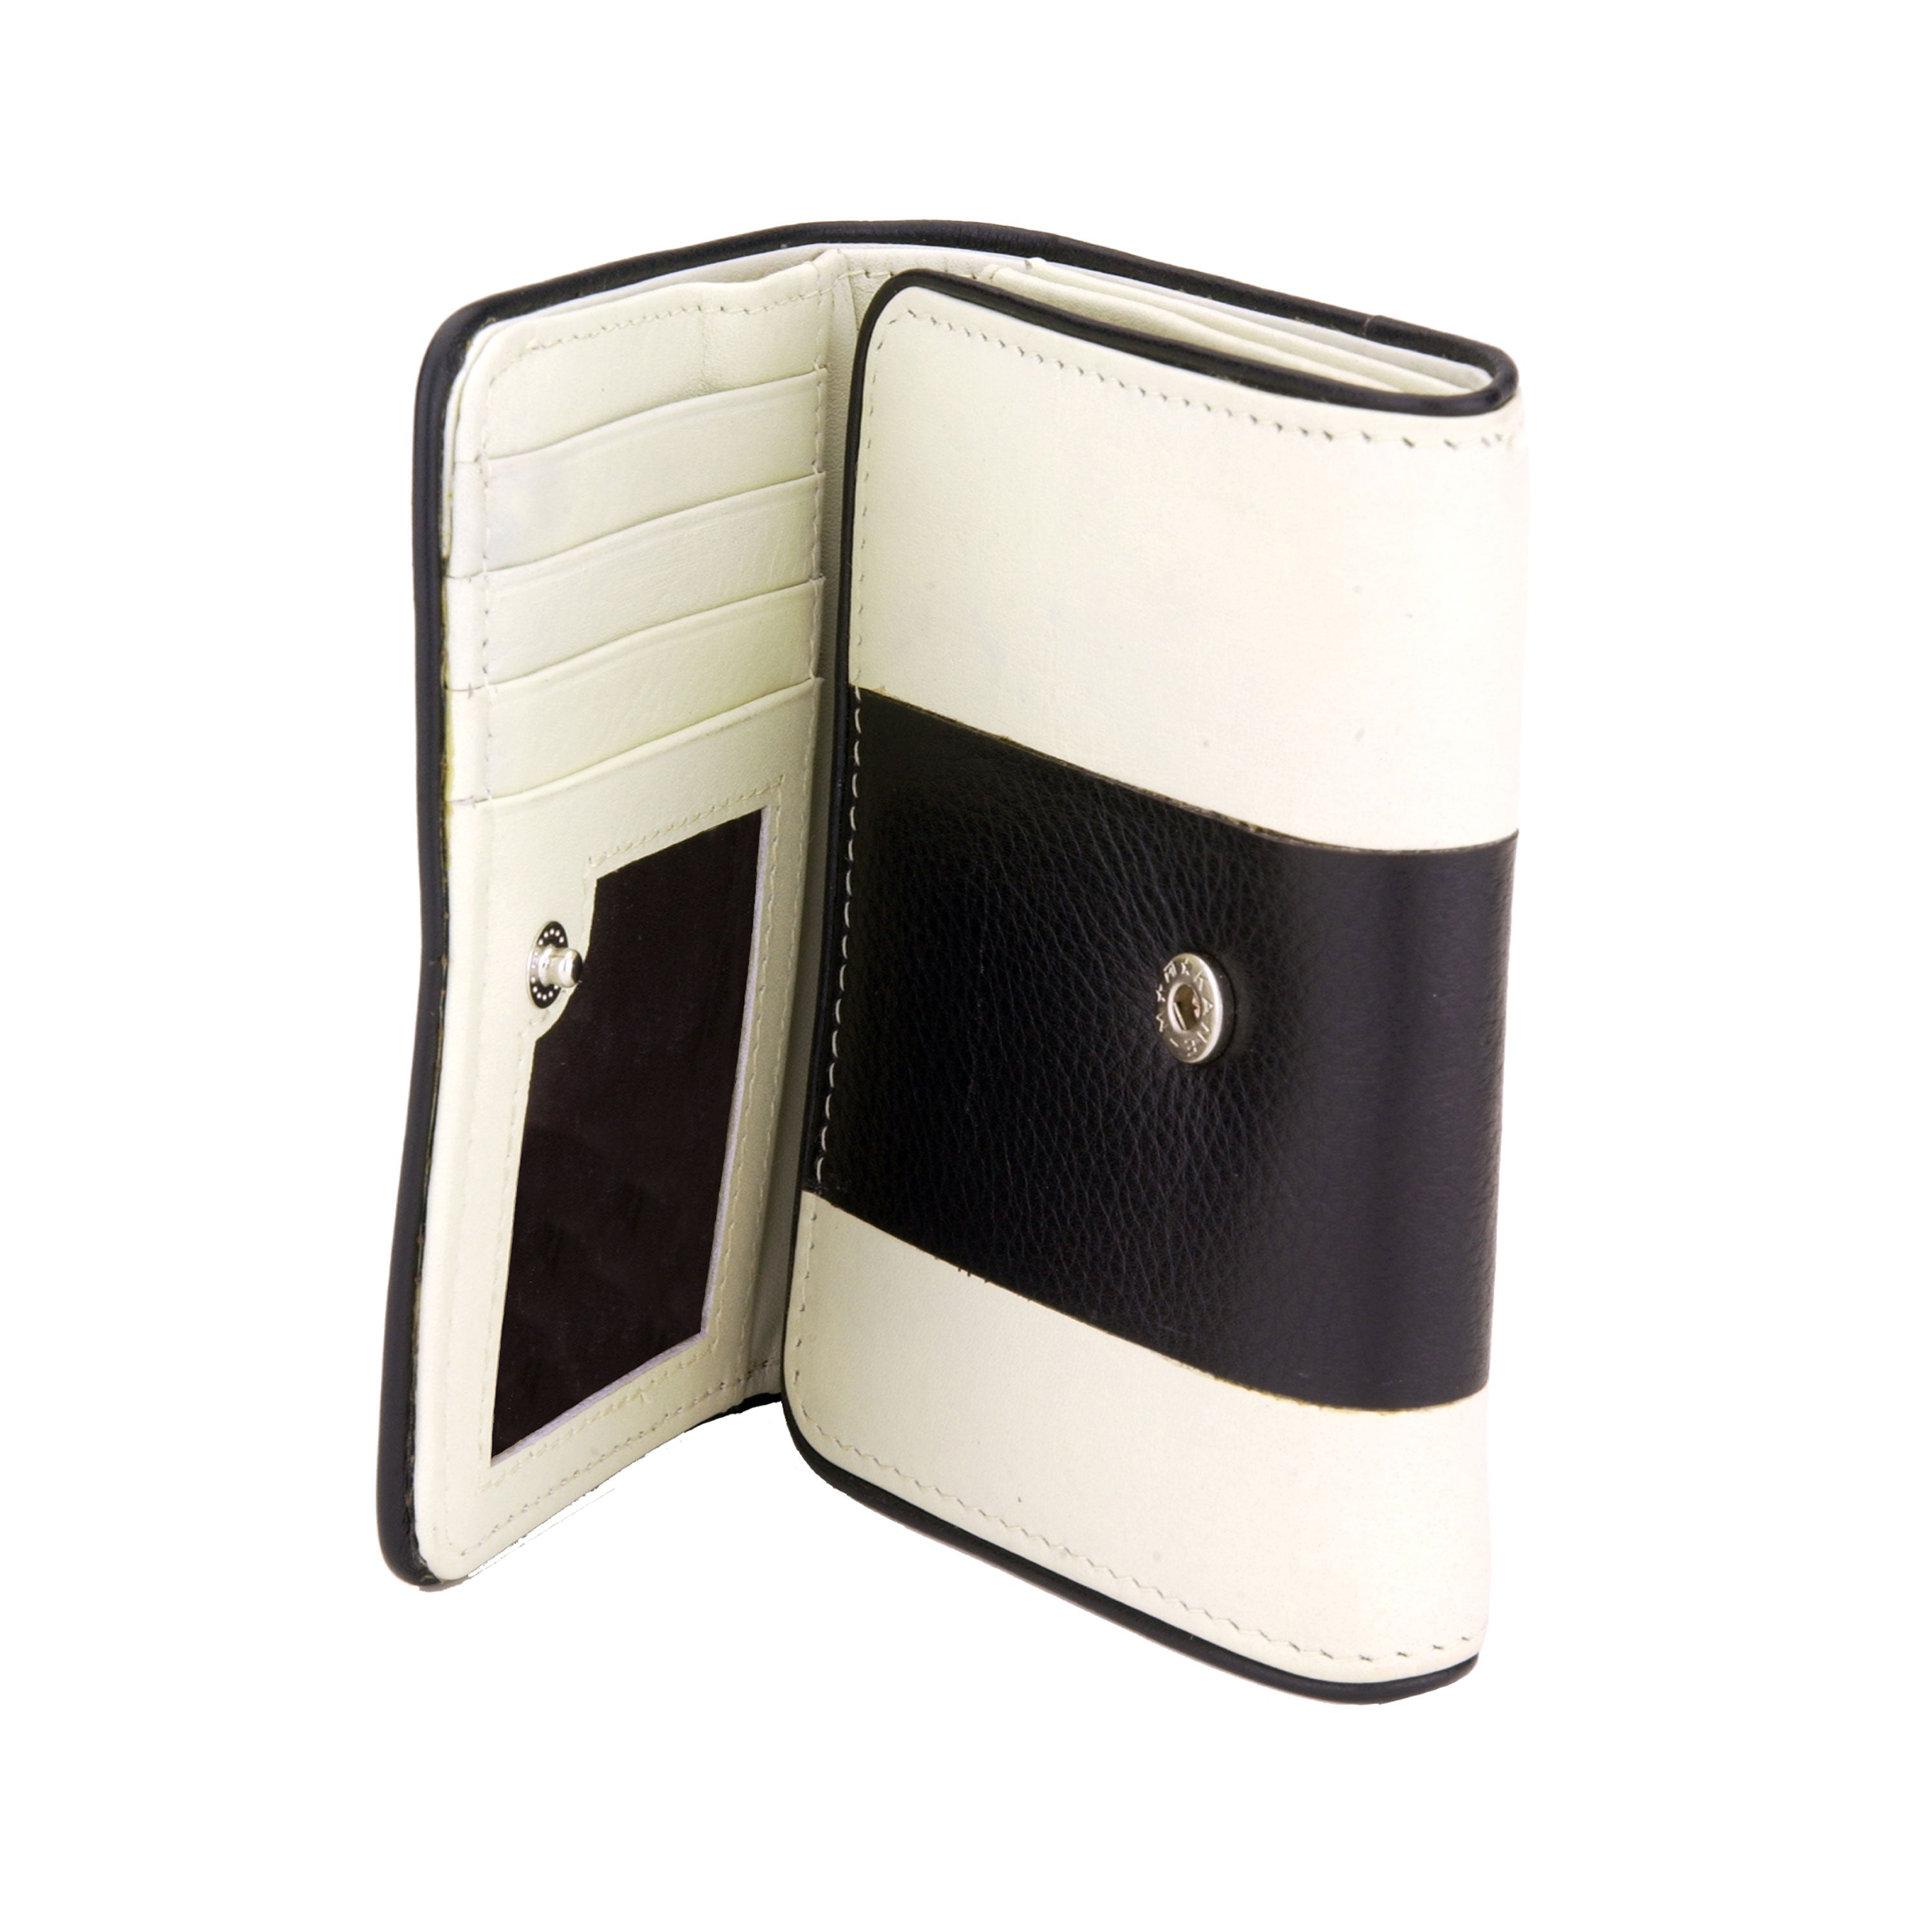 Medium sized cream leather wallet, with inlaid black leather stripe accent. Flap close with hidden snap. Upcycled, sustainable.